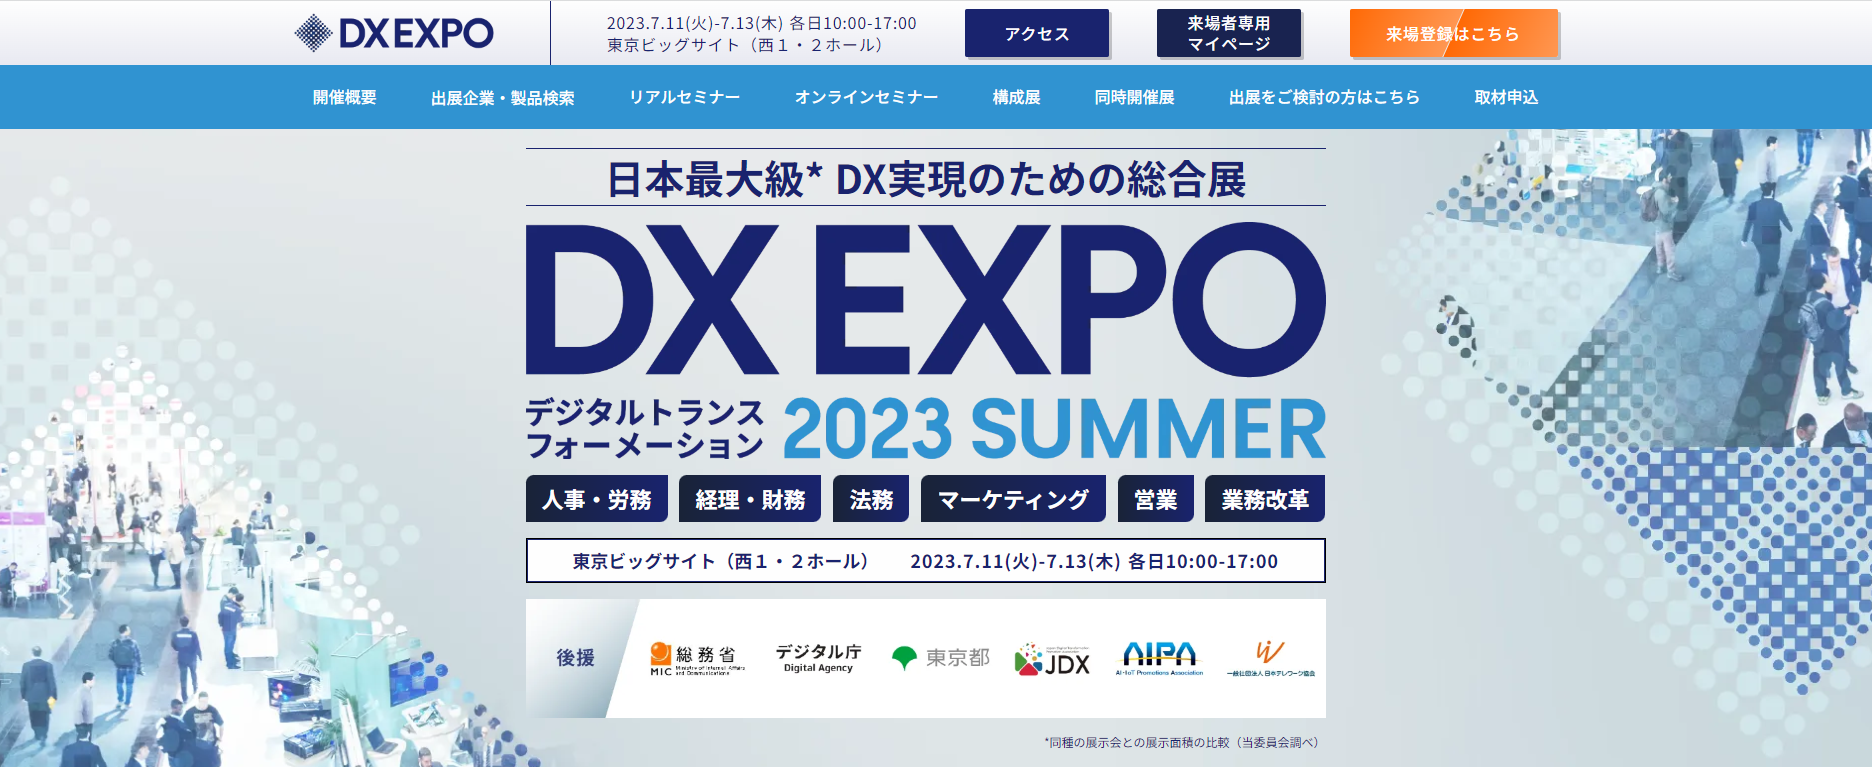 DX EXPO【2023SUMMER】【東京展】東京ビッグサイト